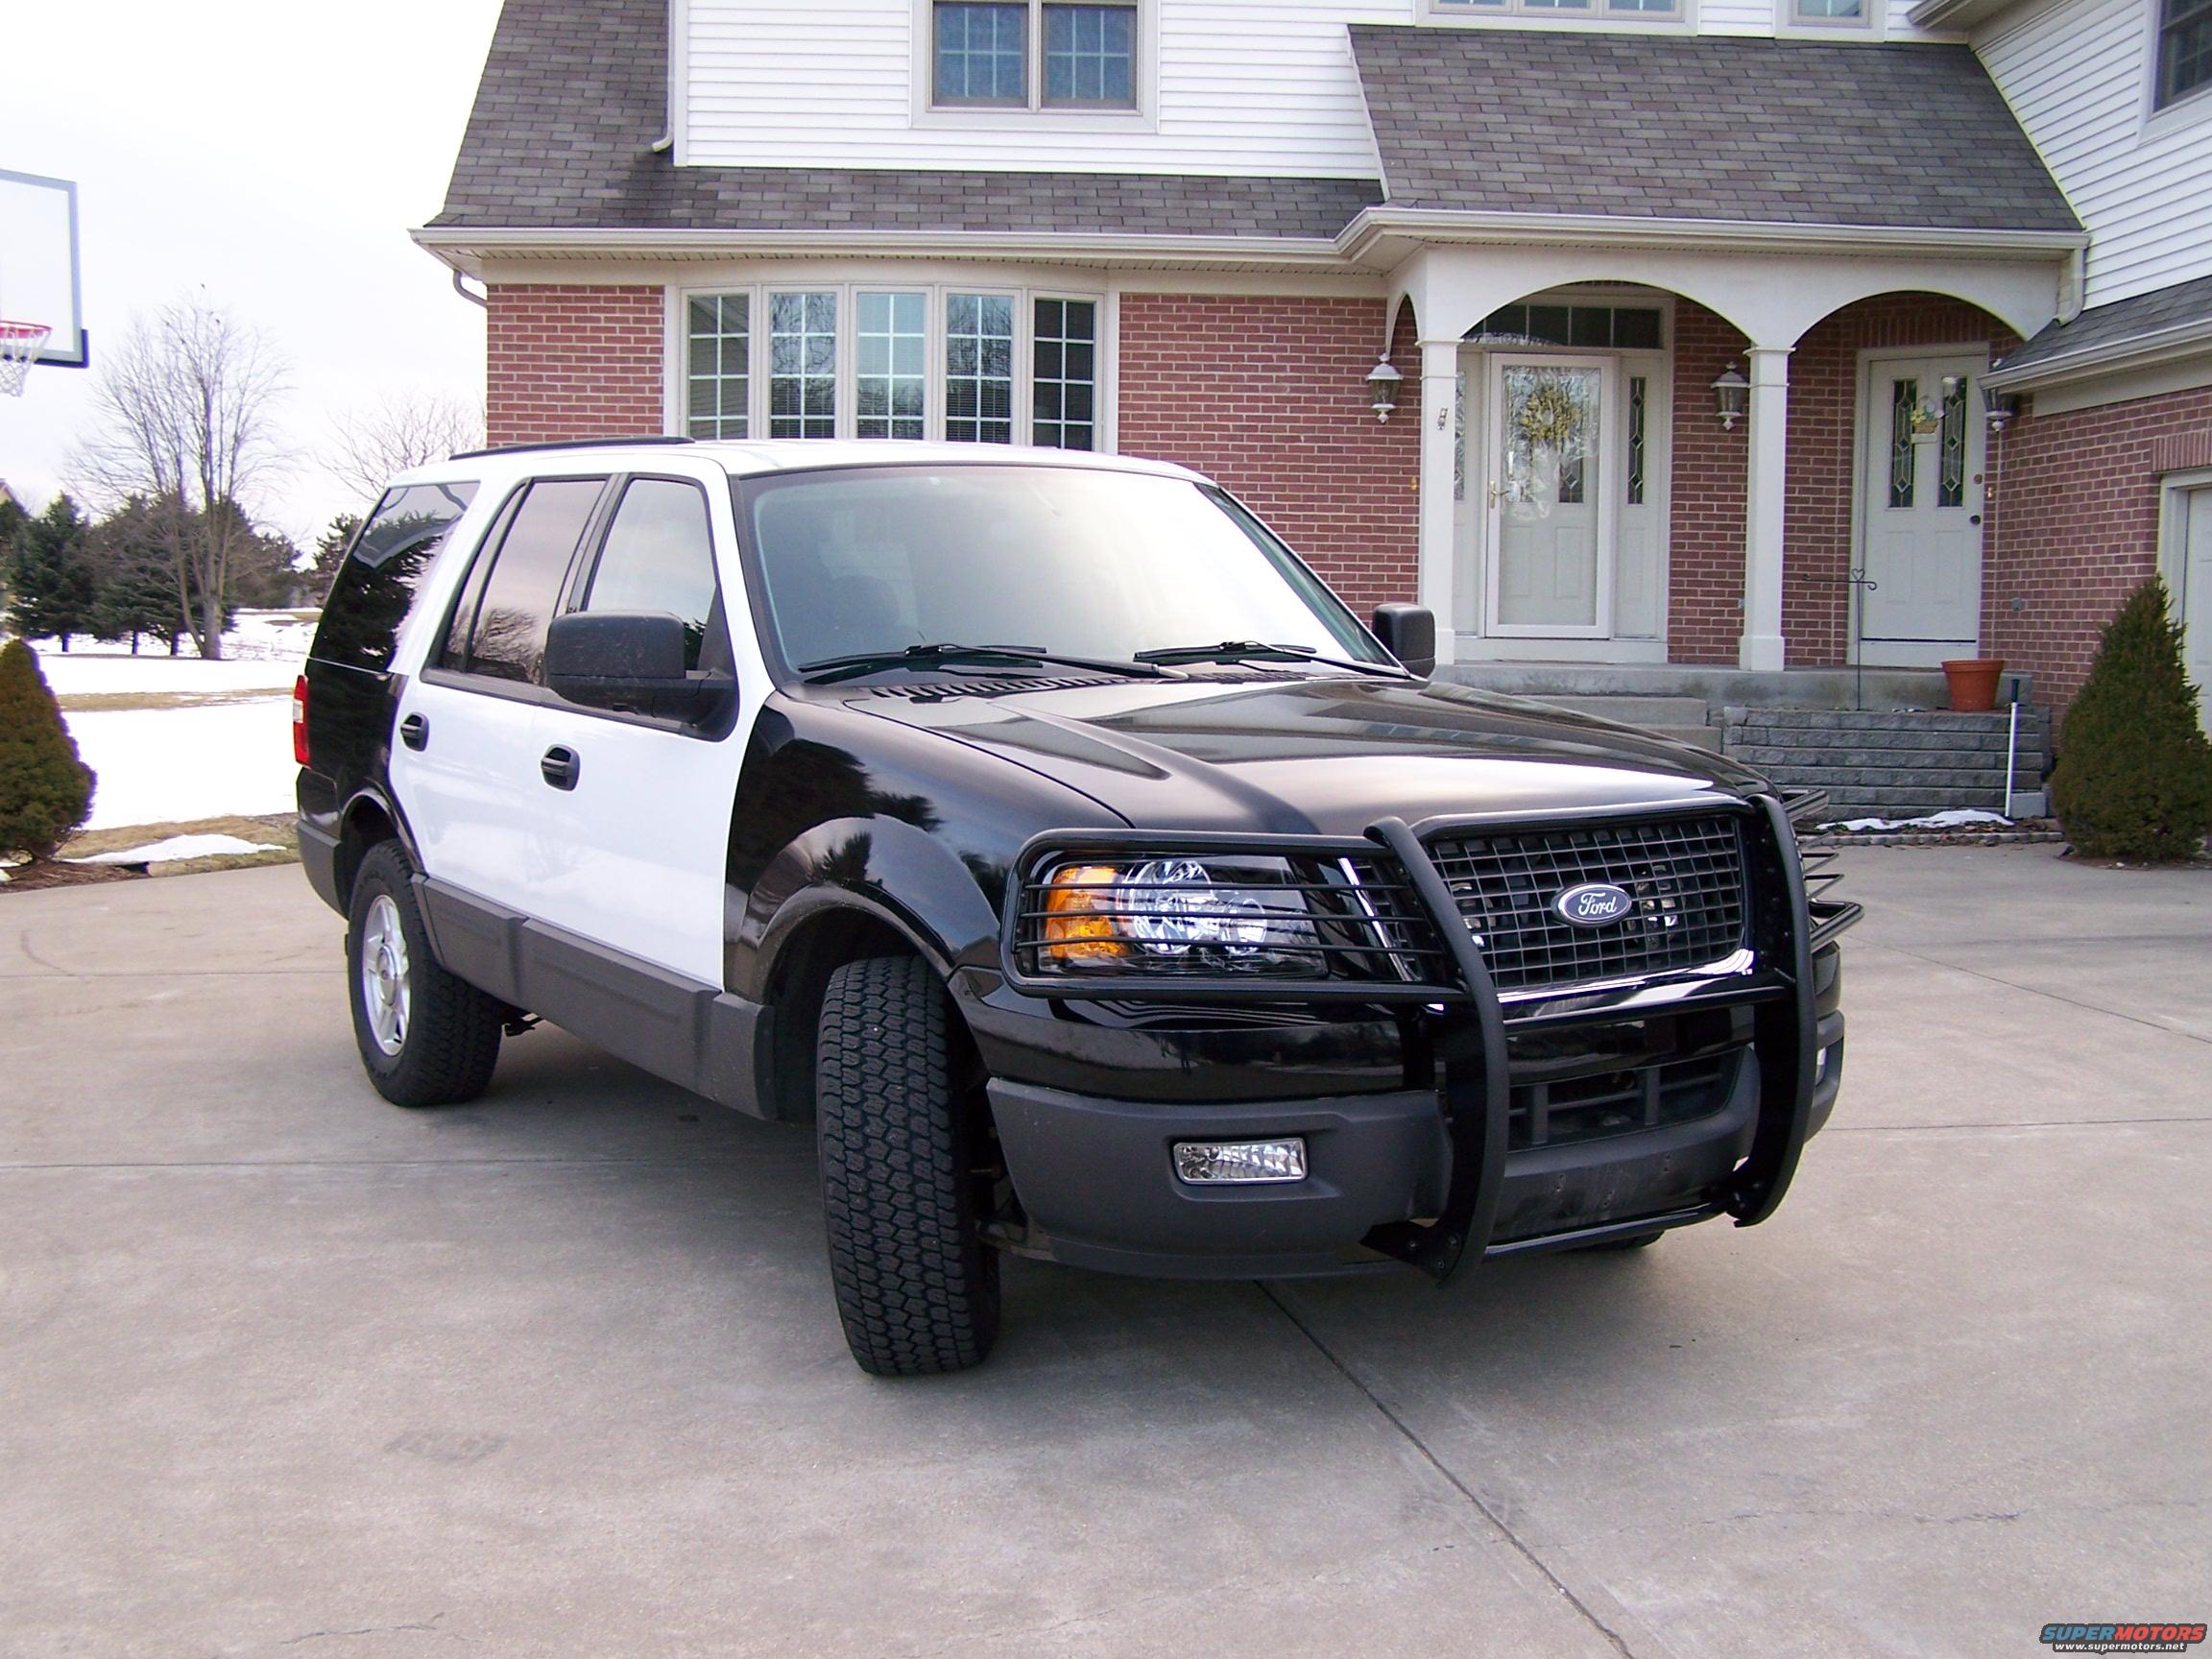 Bumper for ford expedition 2004 #3